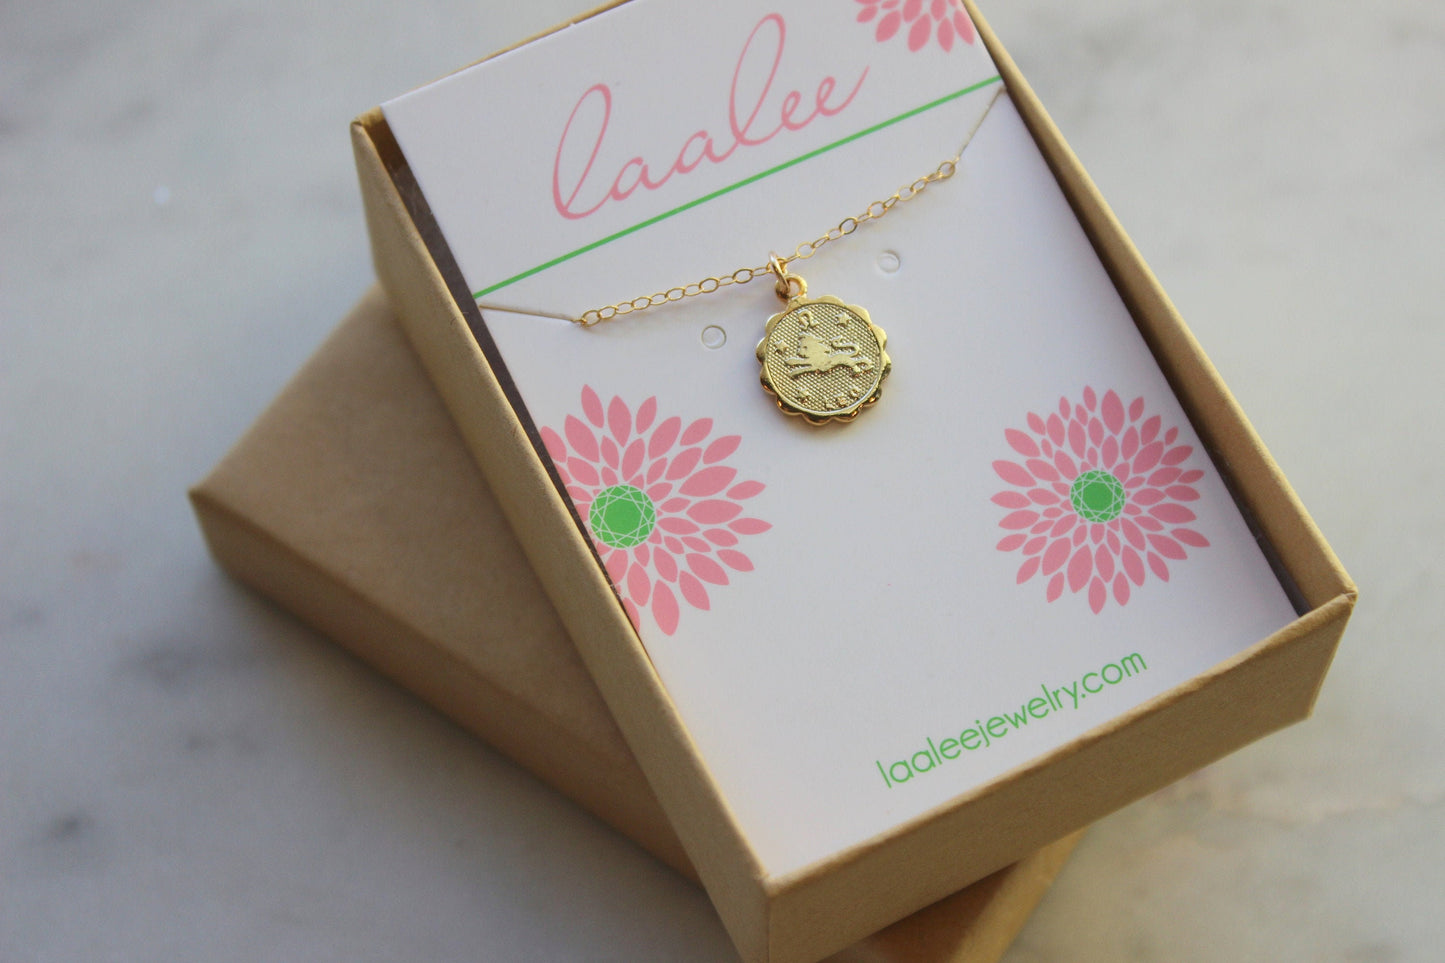 Leo, Leo Necklace, Gold Leo Jewelry, Leo Coin Necklace, Leo Zodiac Necklace, Leo Celestial Jewelry, Leo Astrology Gift, August Birthday Gift